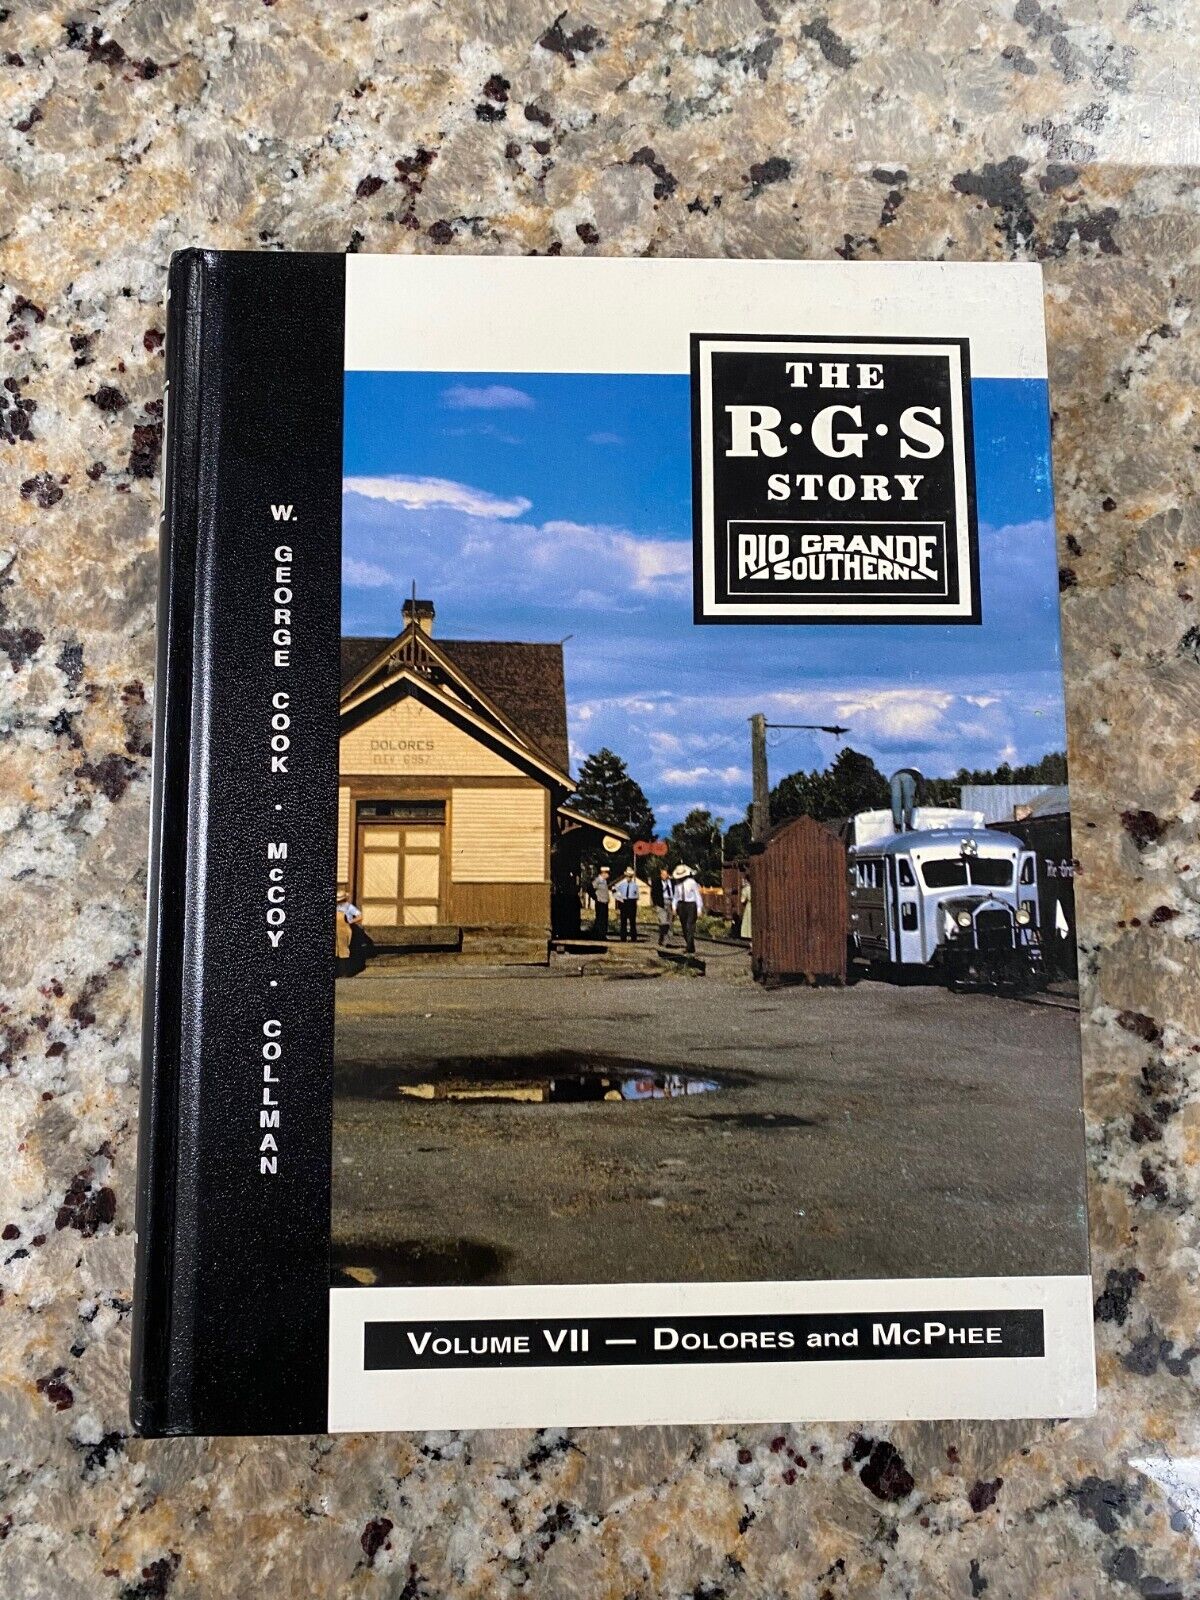 RGS Story Vol 7 Dolores to McPhee Book with Map HOn3 Sn3 On3